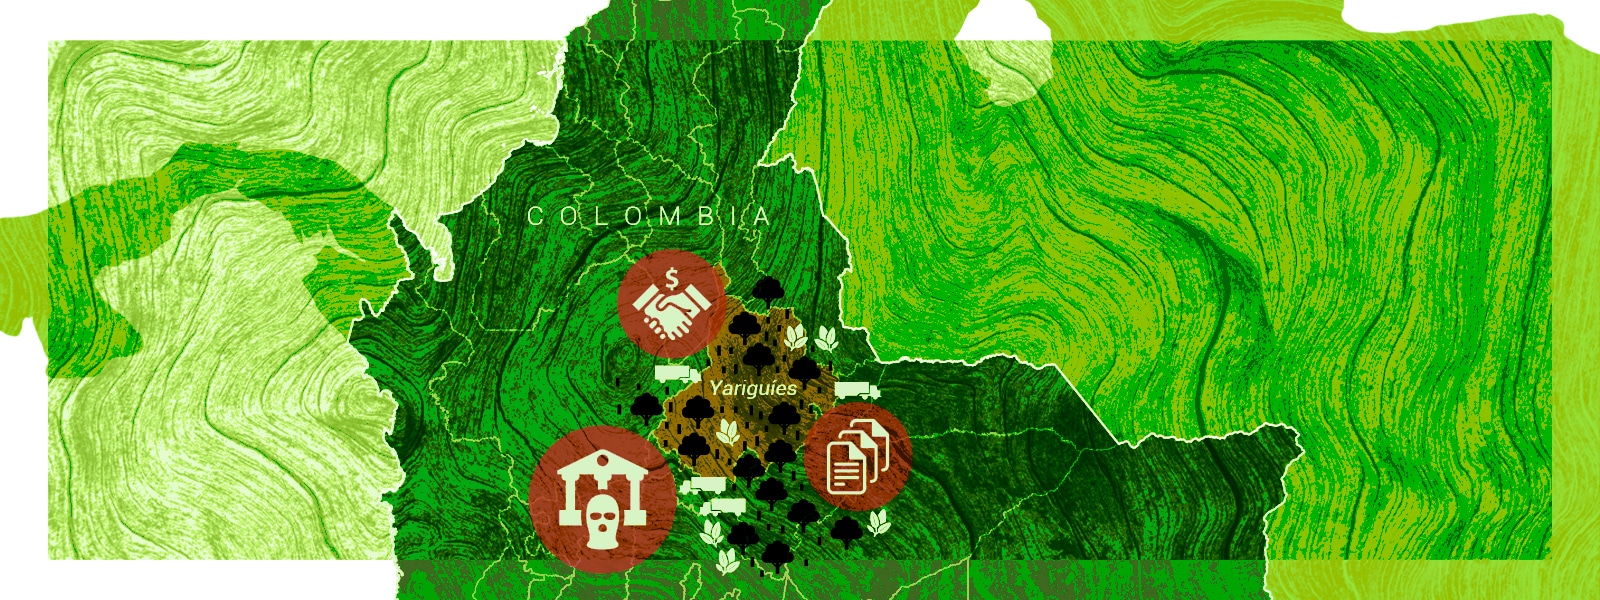 How Colombian Regulators Became Purveyors of Illegal Wood